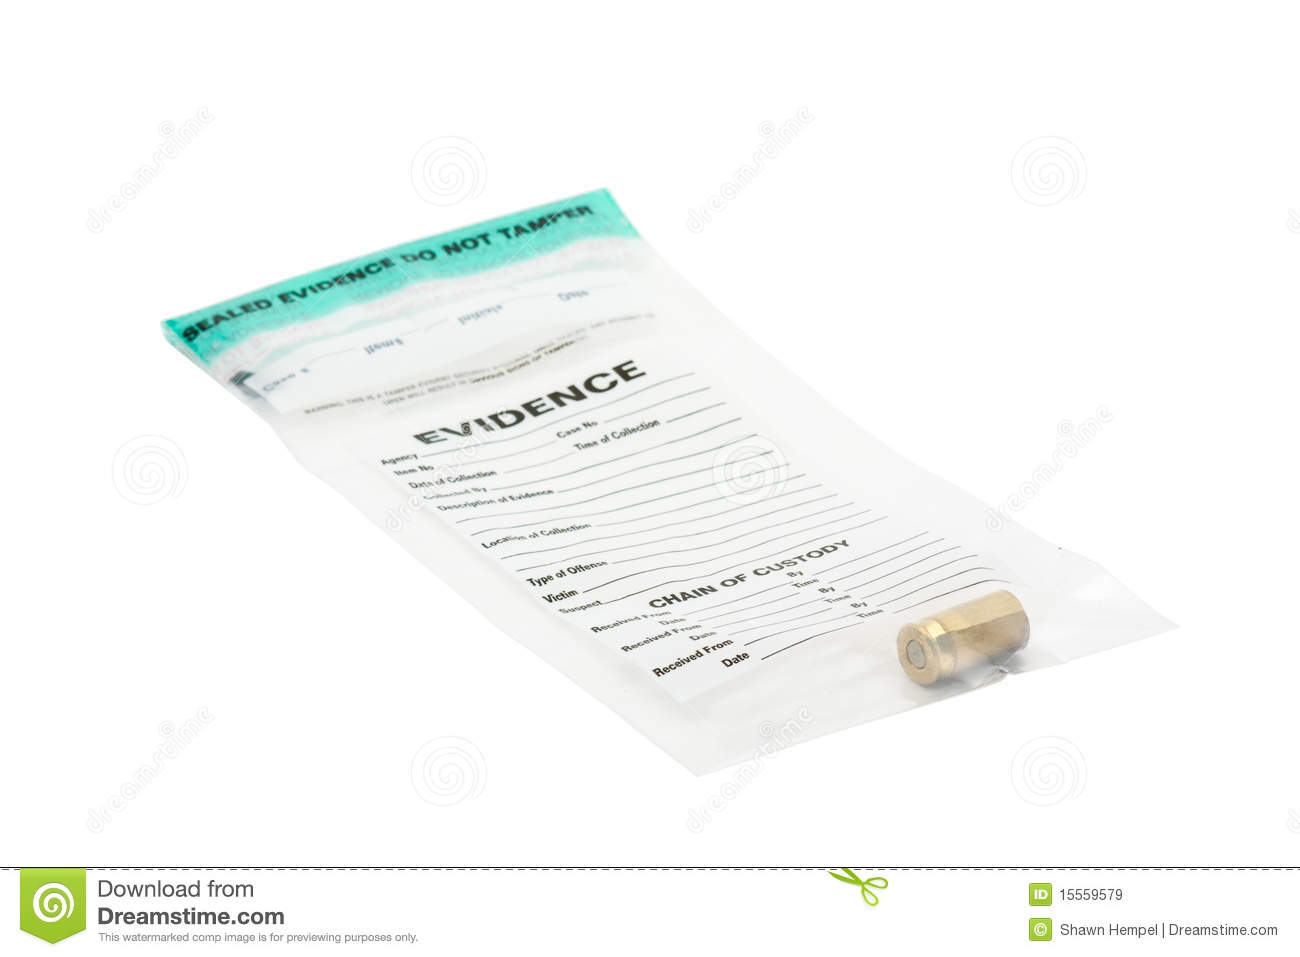 Evidence Bag Royalty Free Stock Images   Image  15559579